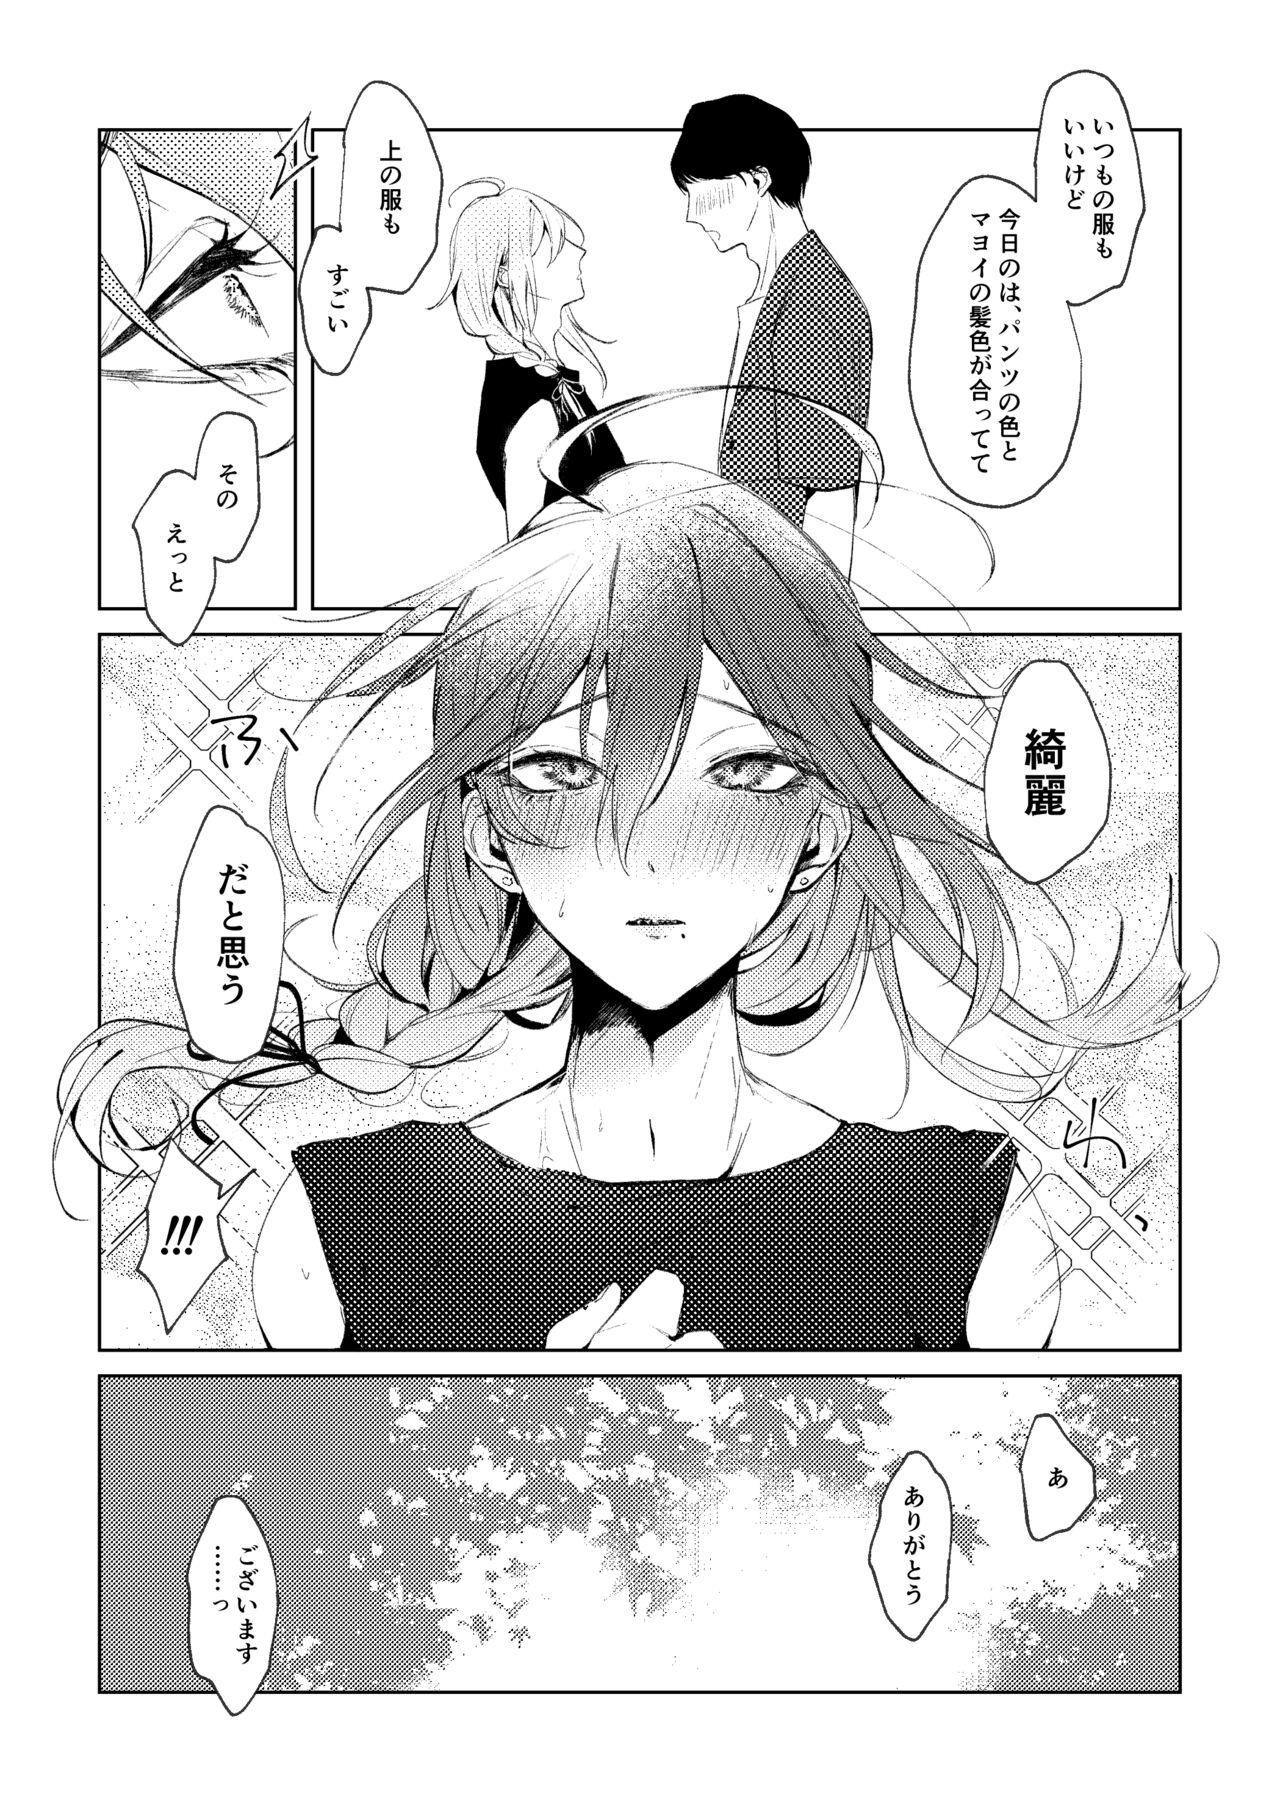 Bubble Butt 俺のカノジョのマヨイくん。 - Ensemble stars Roleplay - Page 6